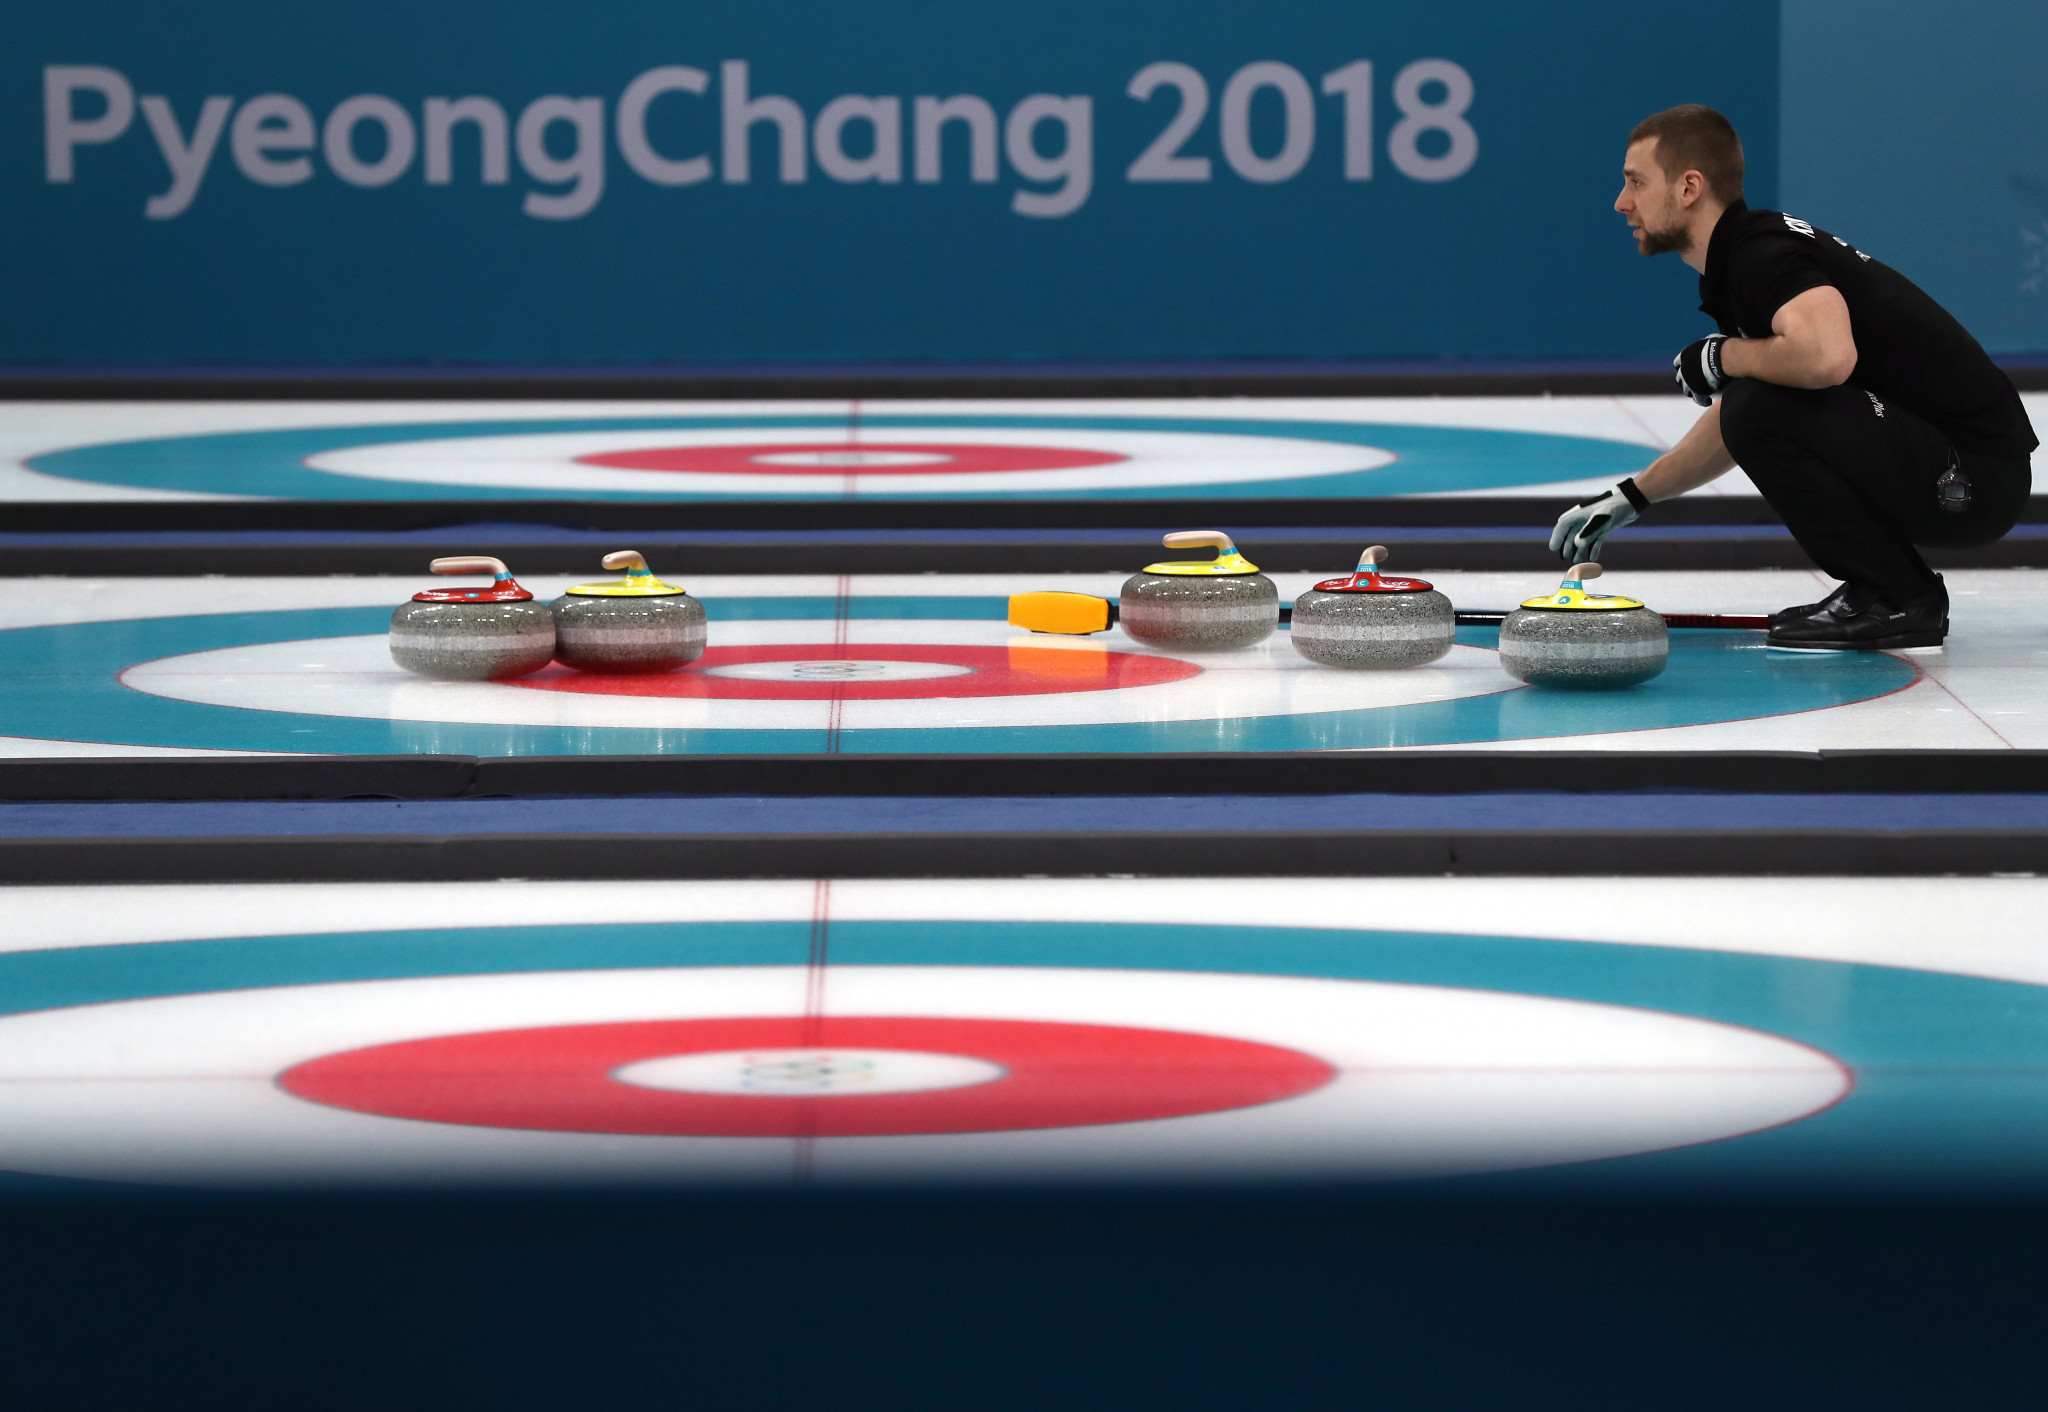 Aleksandr Krushelnitckii was stripped of the Pyeongchang 2018 bronze medal he won in the mixed doubles curling following a failed drugs test for meldonium ©Pyeongchang 2018 